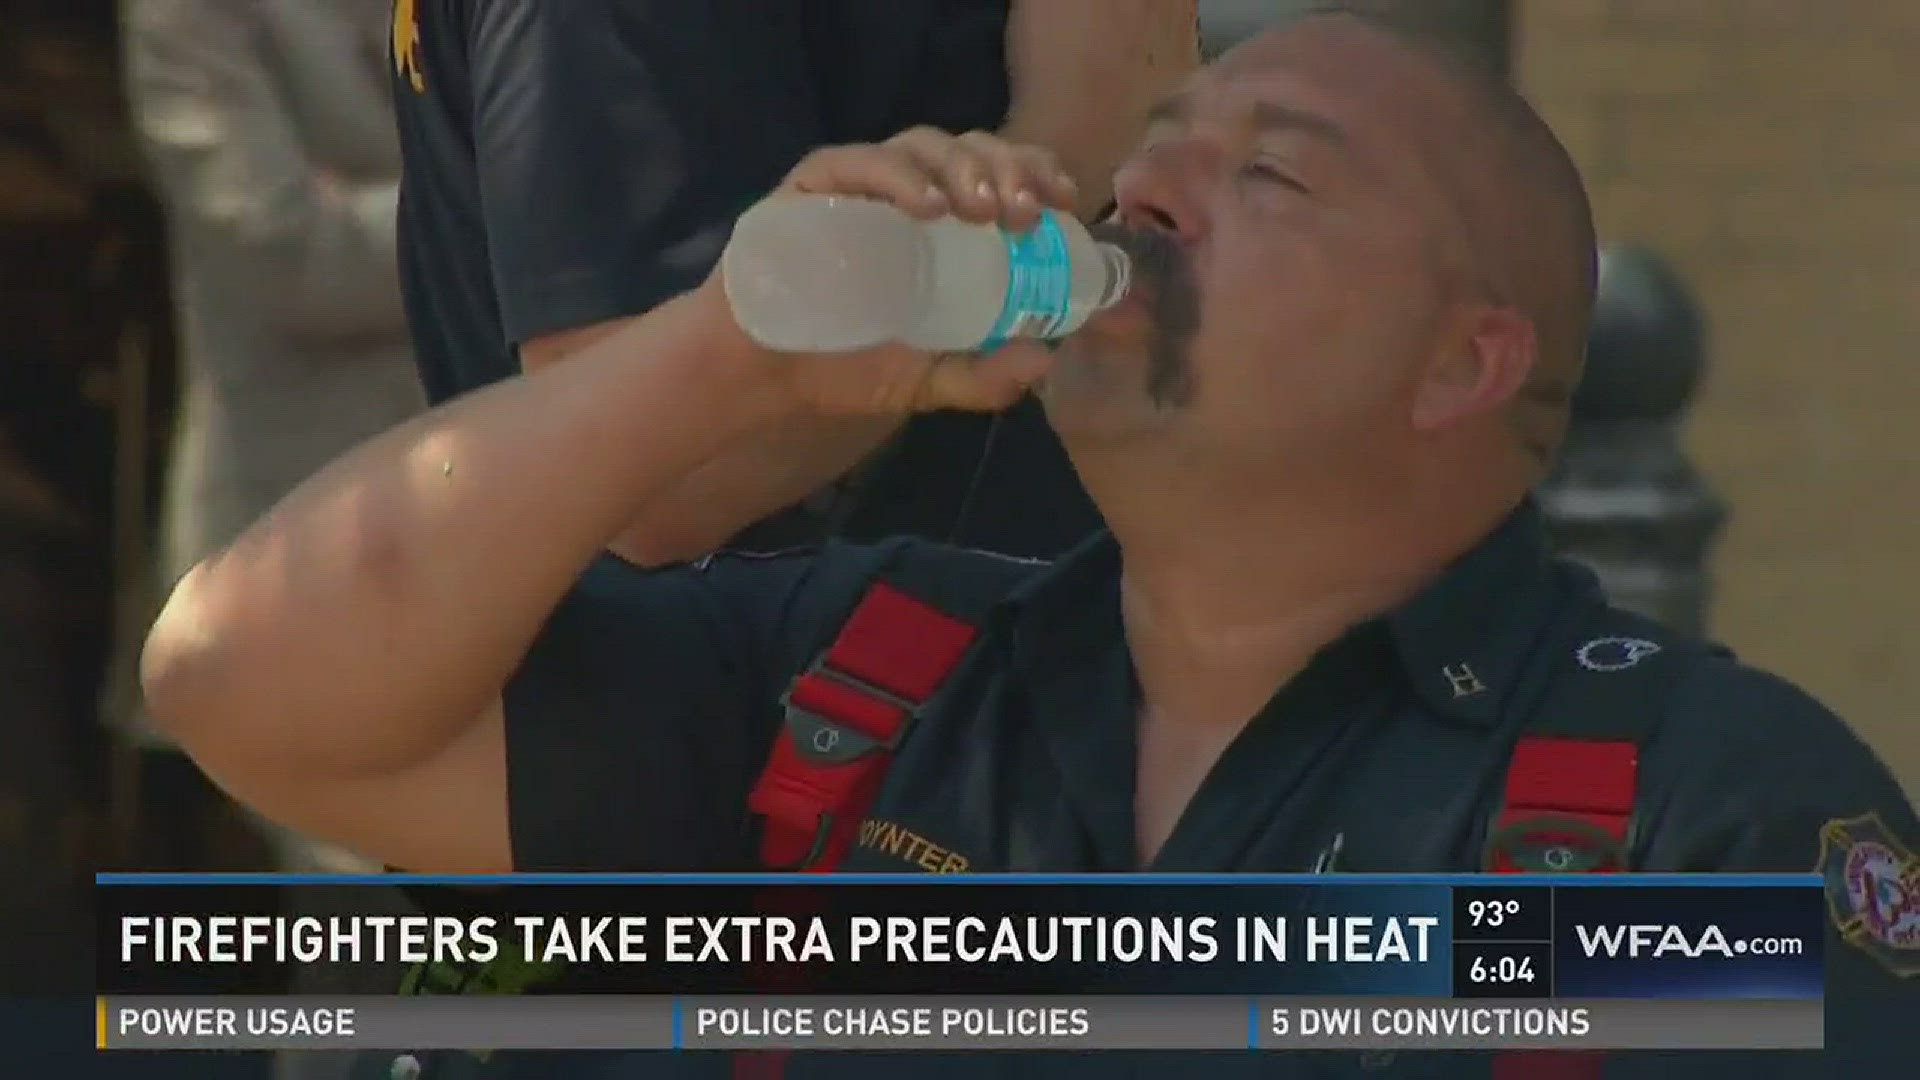 Firefighters take extra precautions in heat